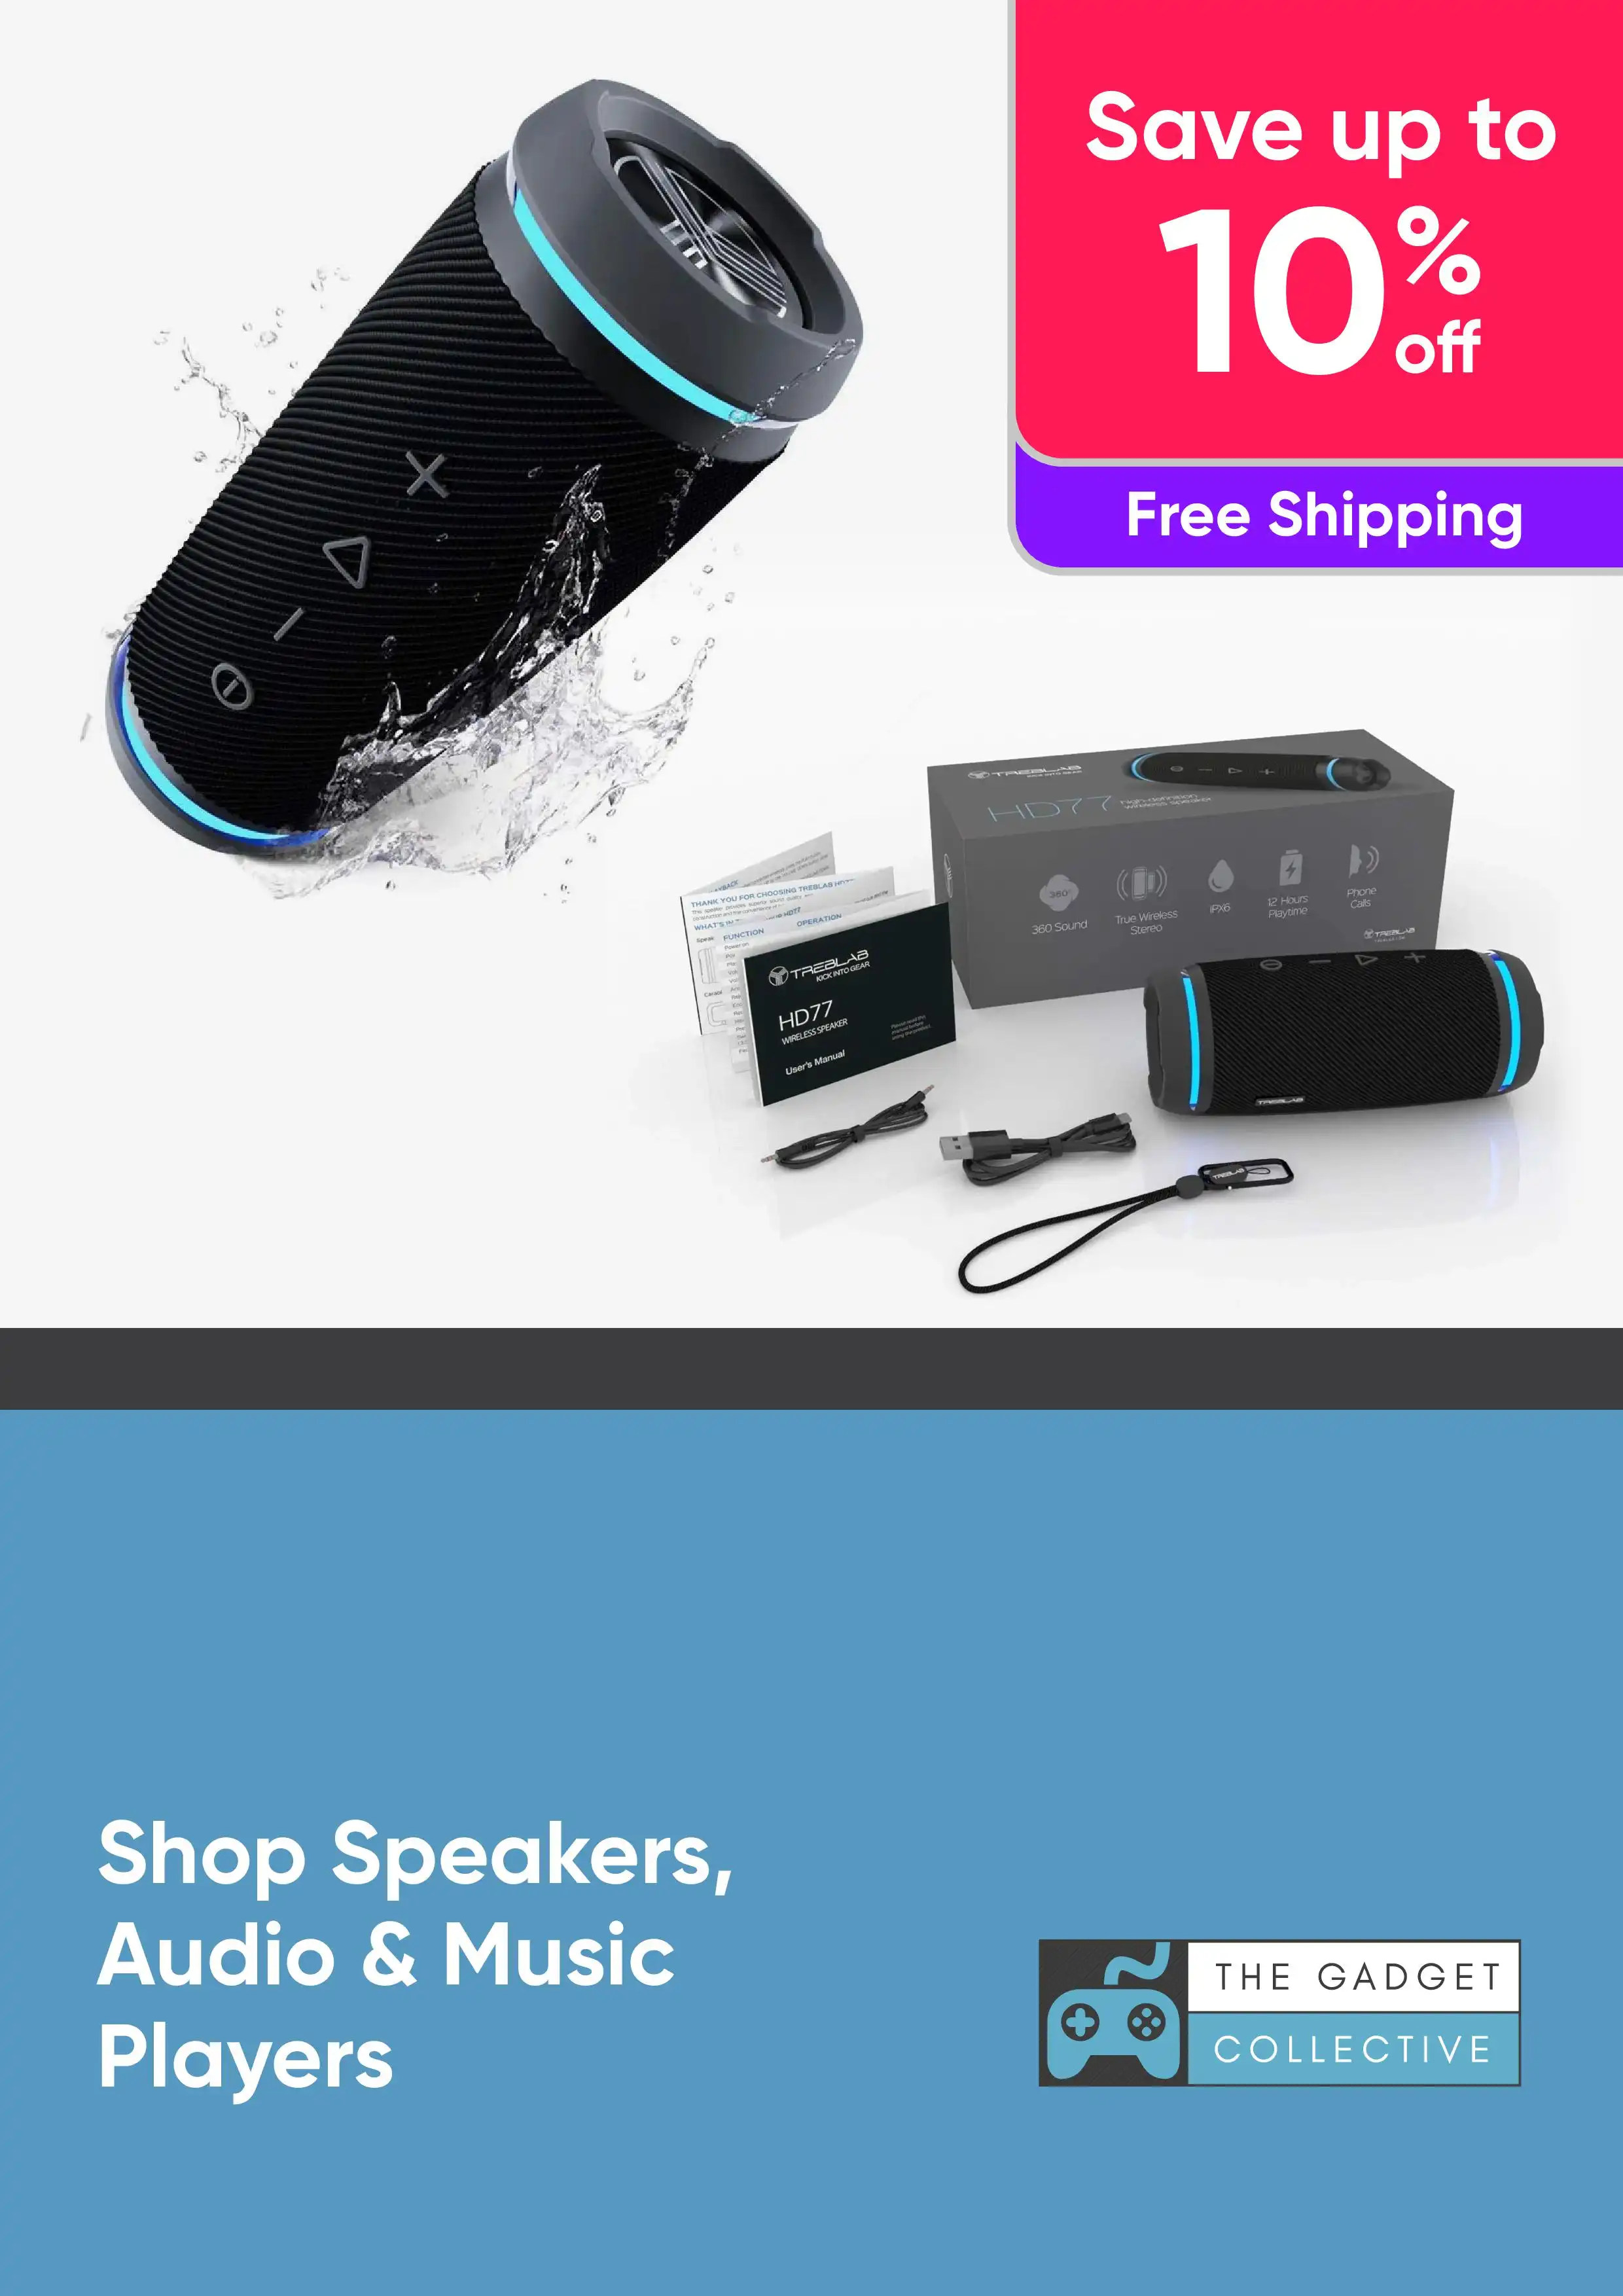 Shop Speakers, Audio & Music Players - Save up to 10%